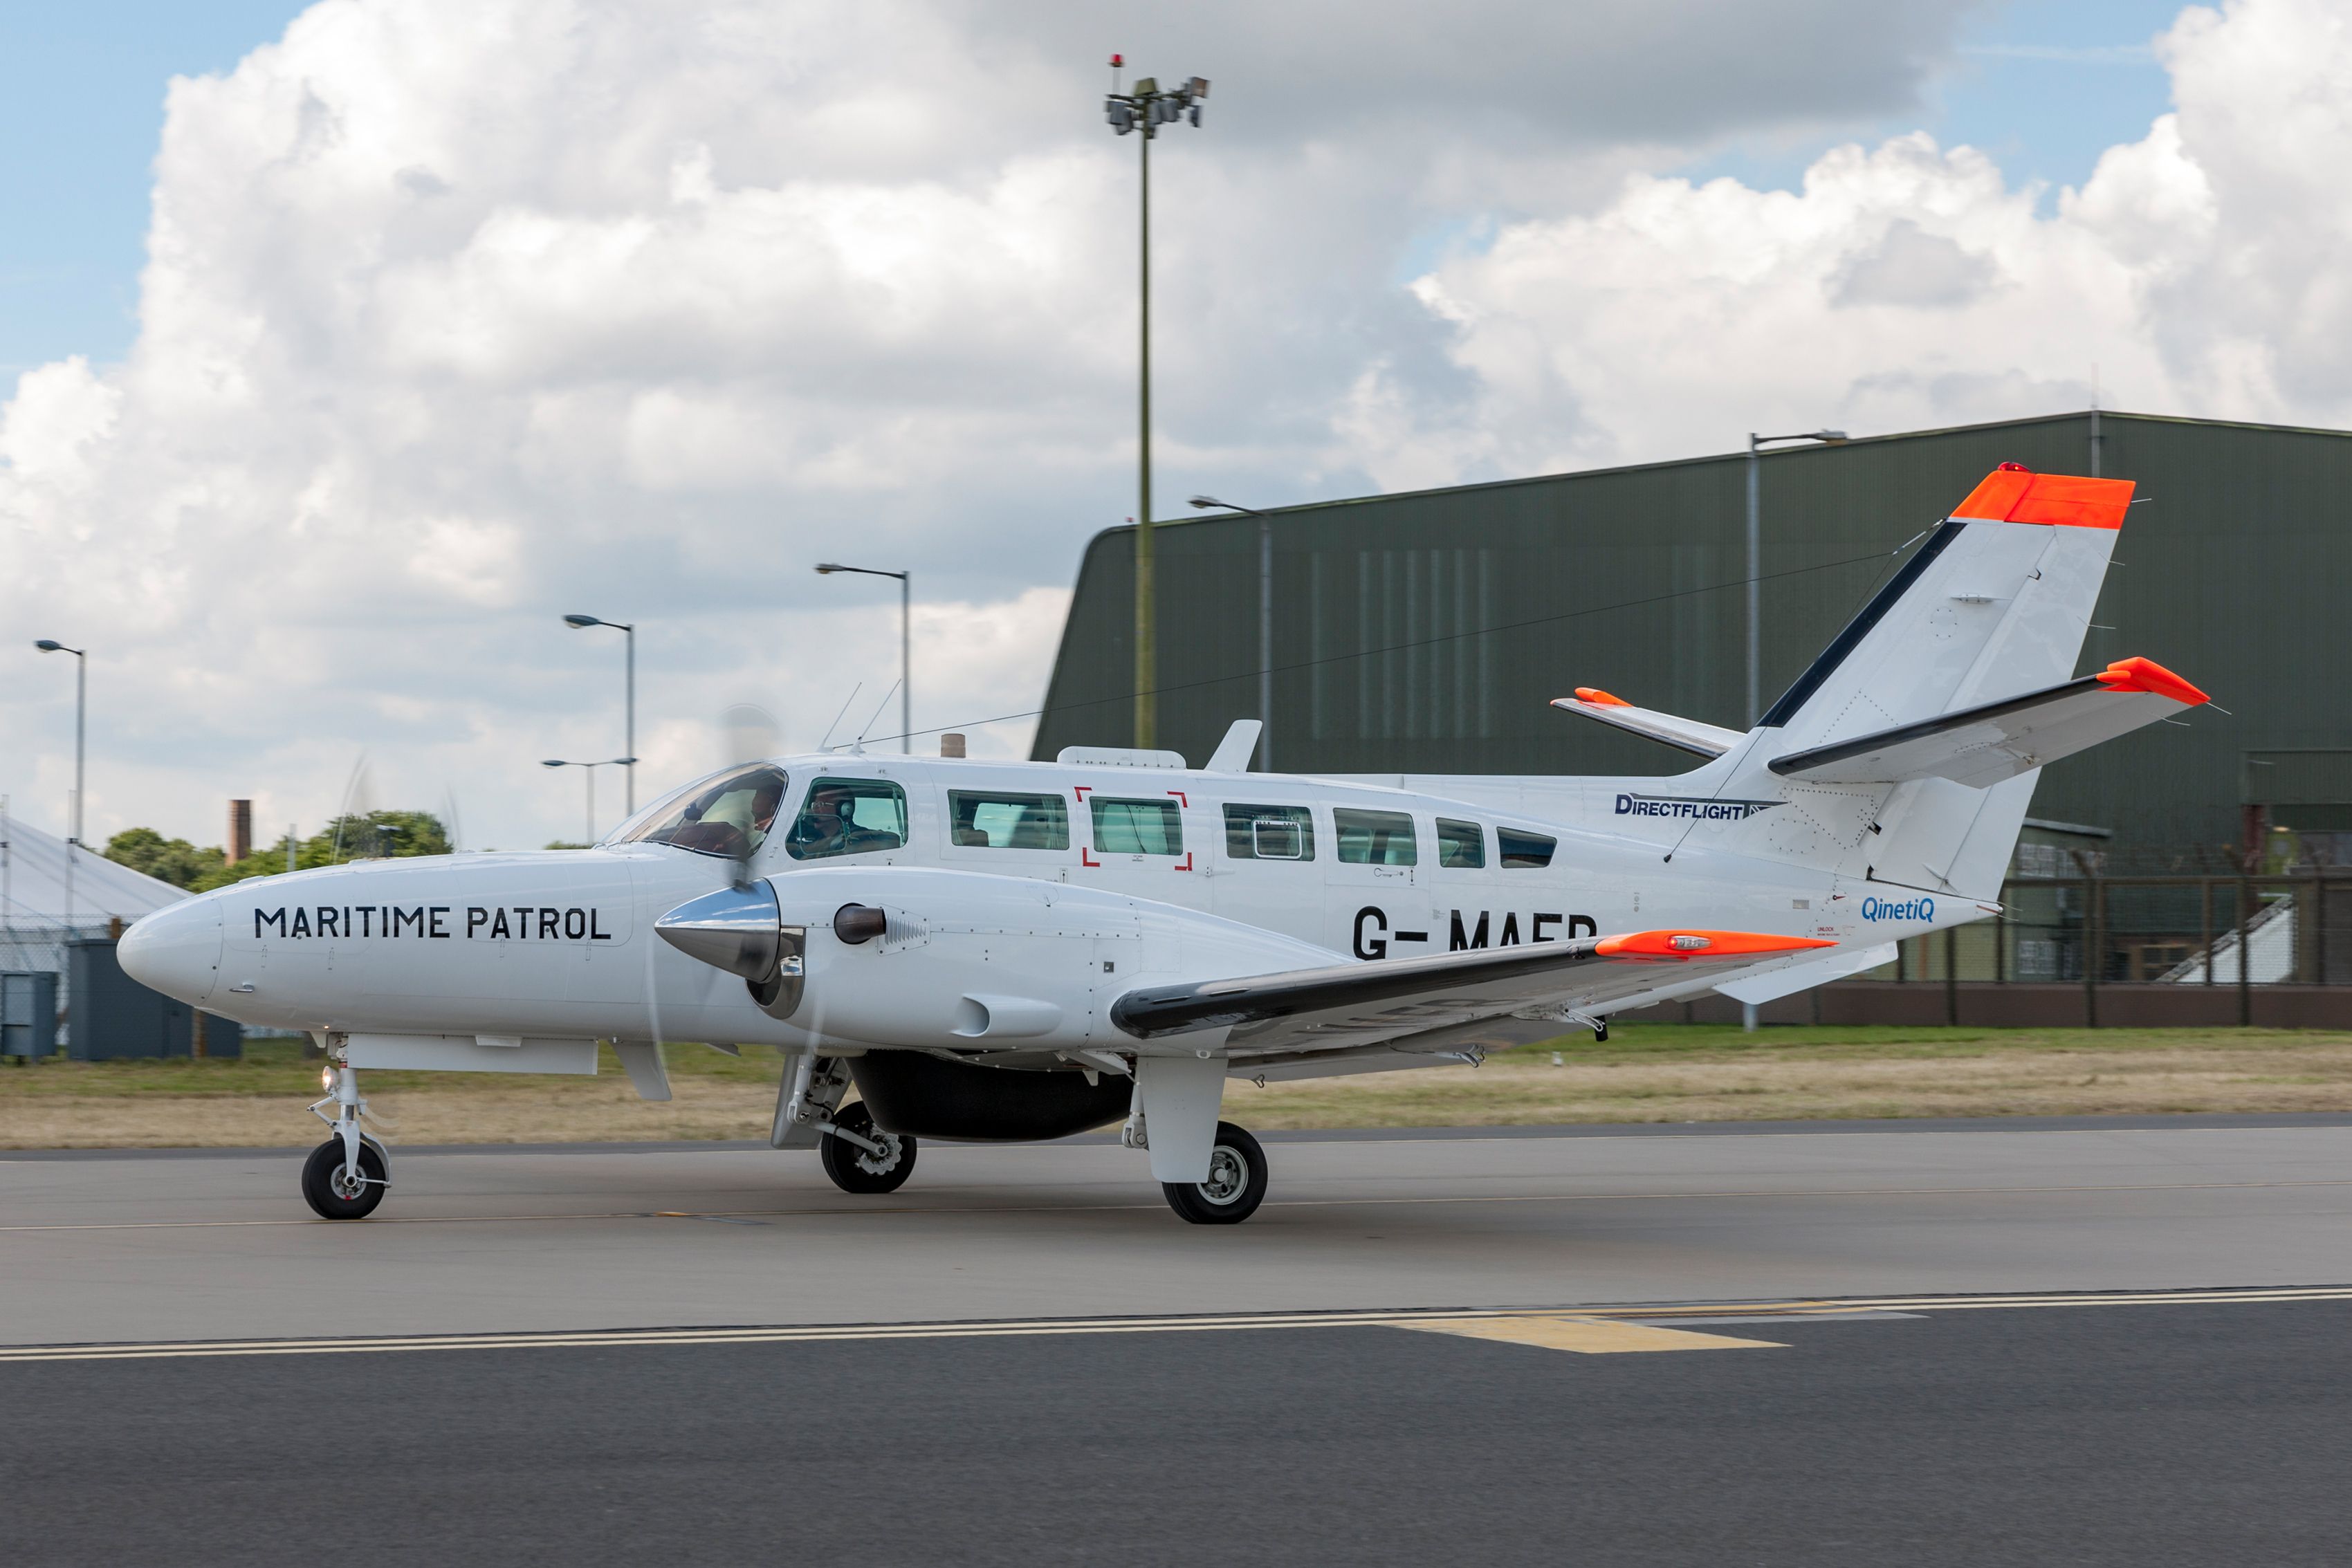 A Reims-Cessna F406 on an airport apron.